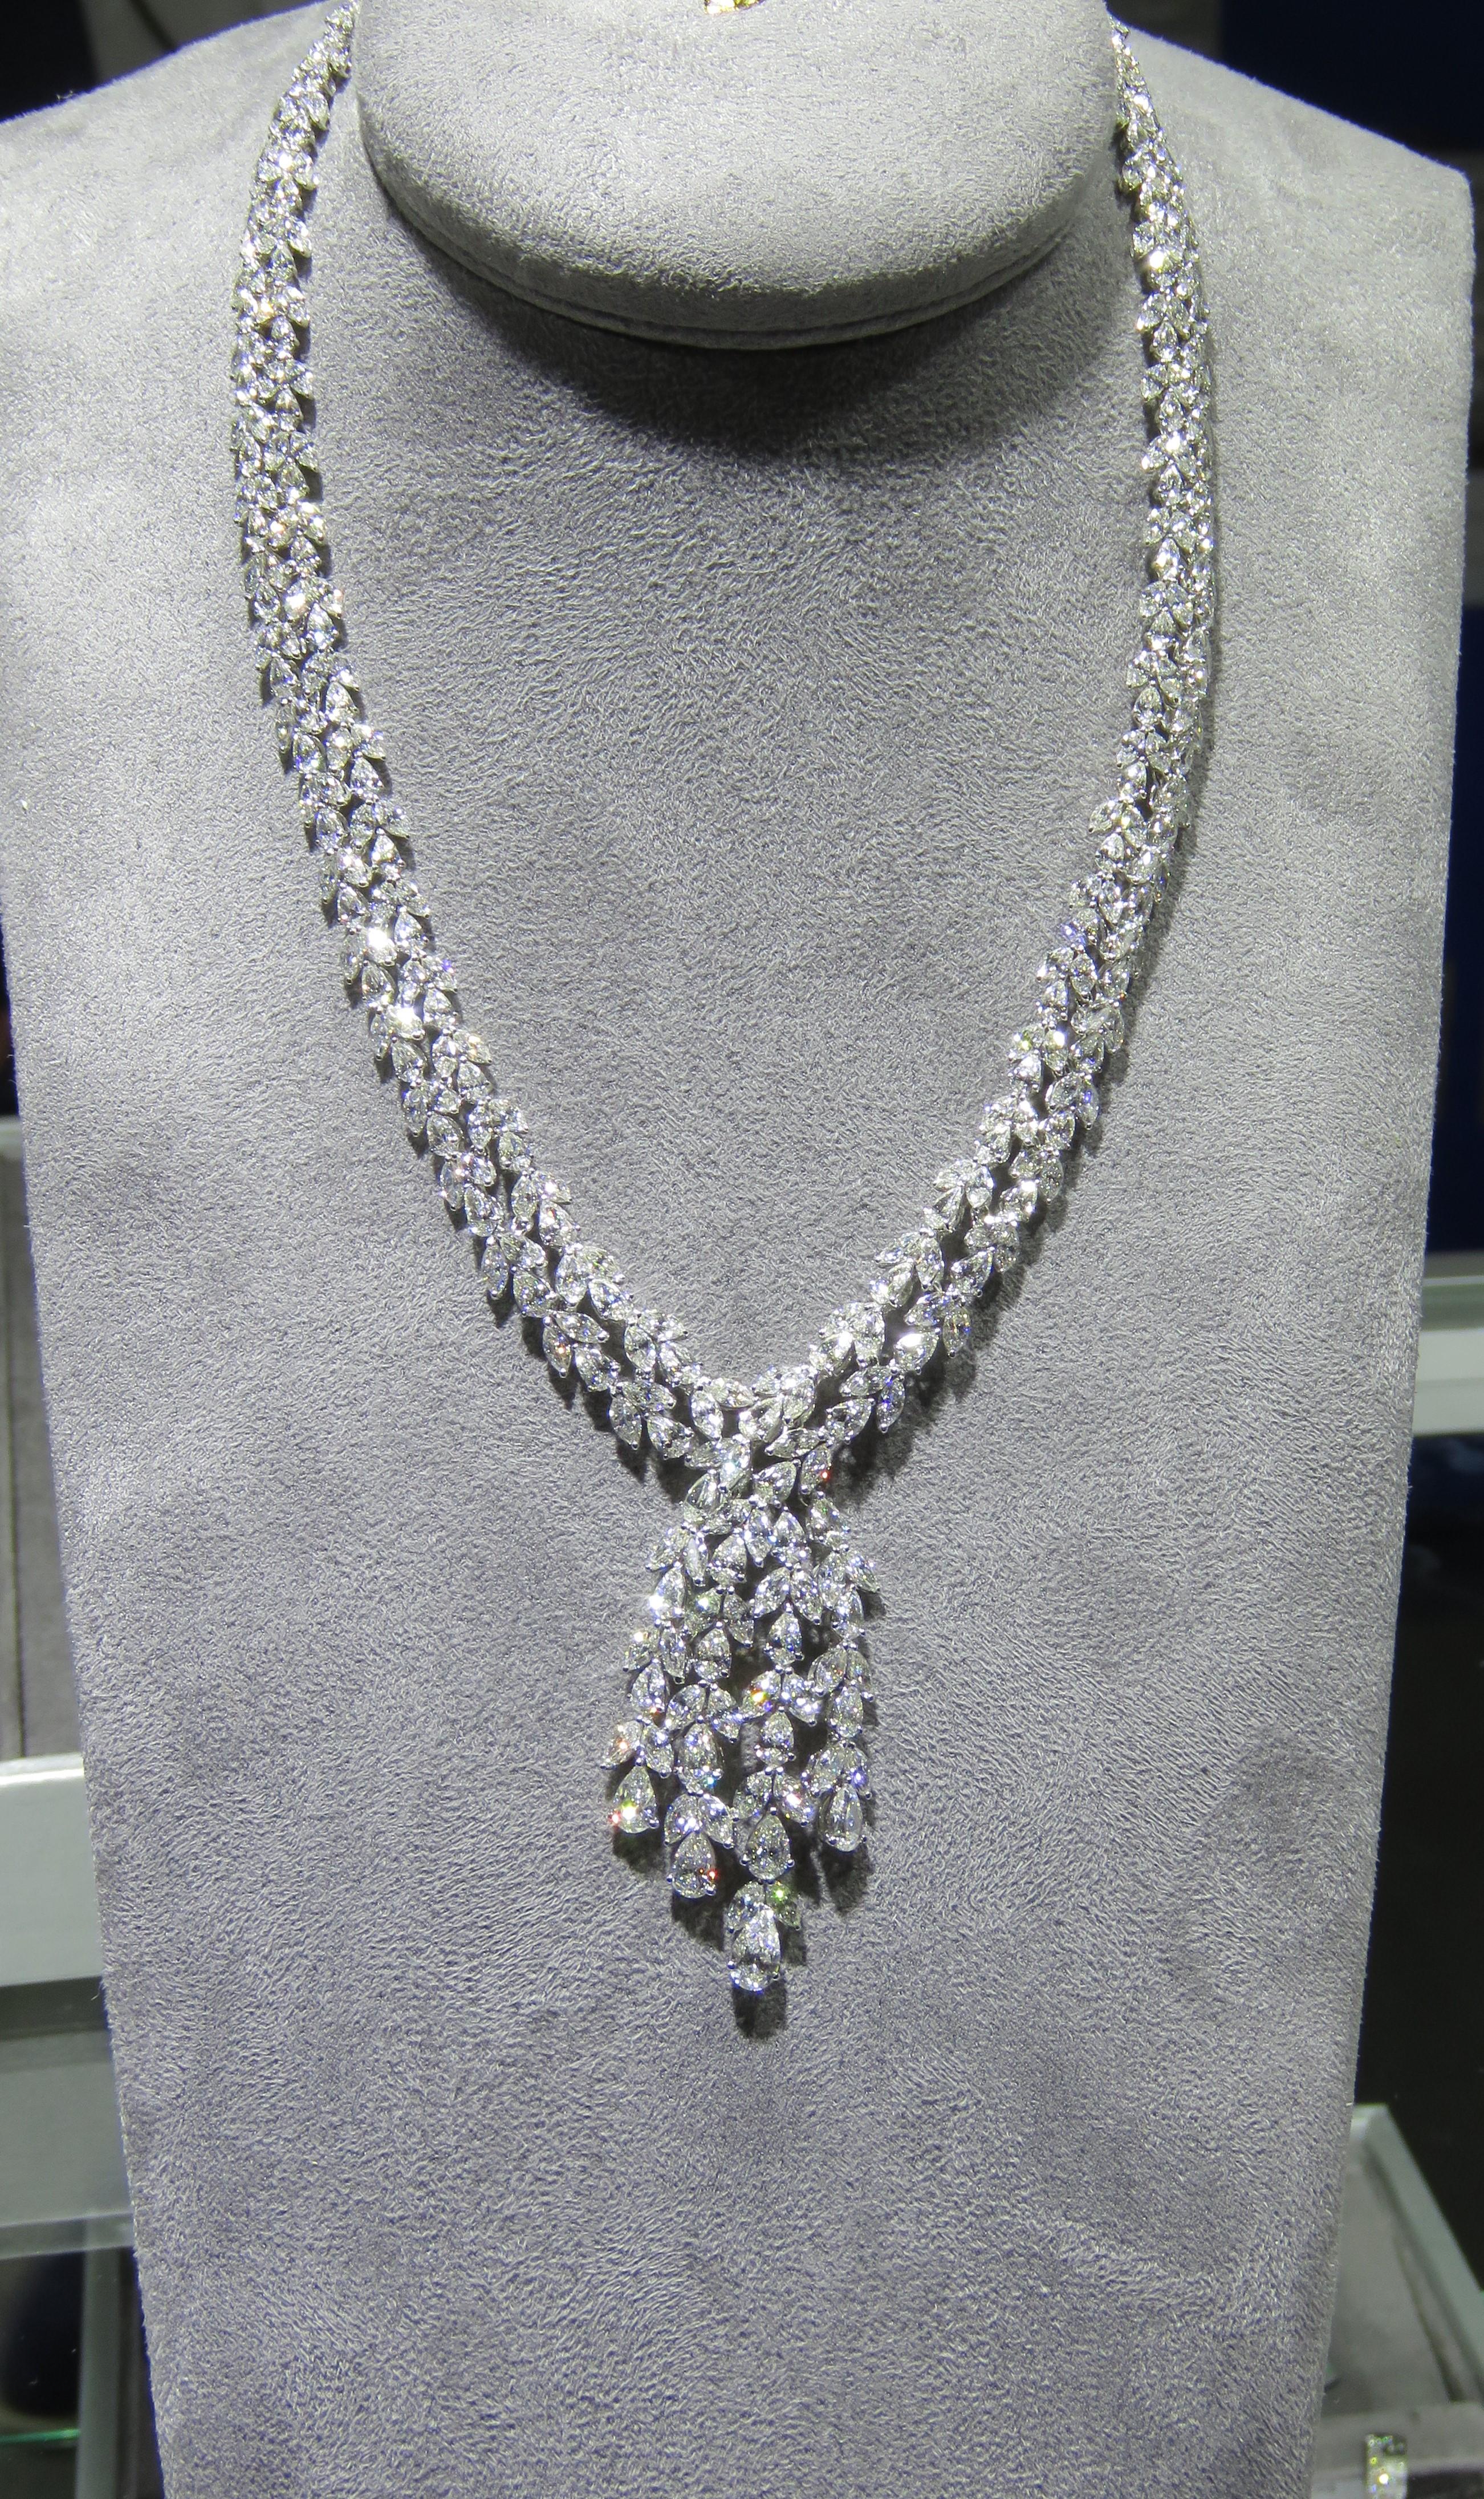 The Following Item we are offering is this Rare Important Radiant 18KT Gold Gorgeous Glittering and Sparkling Magnificent Fancy Diamond Drop Necklace. Necklace contains approx 34CTS of Beautiful Glittering Diamonds all set in 18KT Gold!!  Stones are